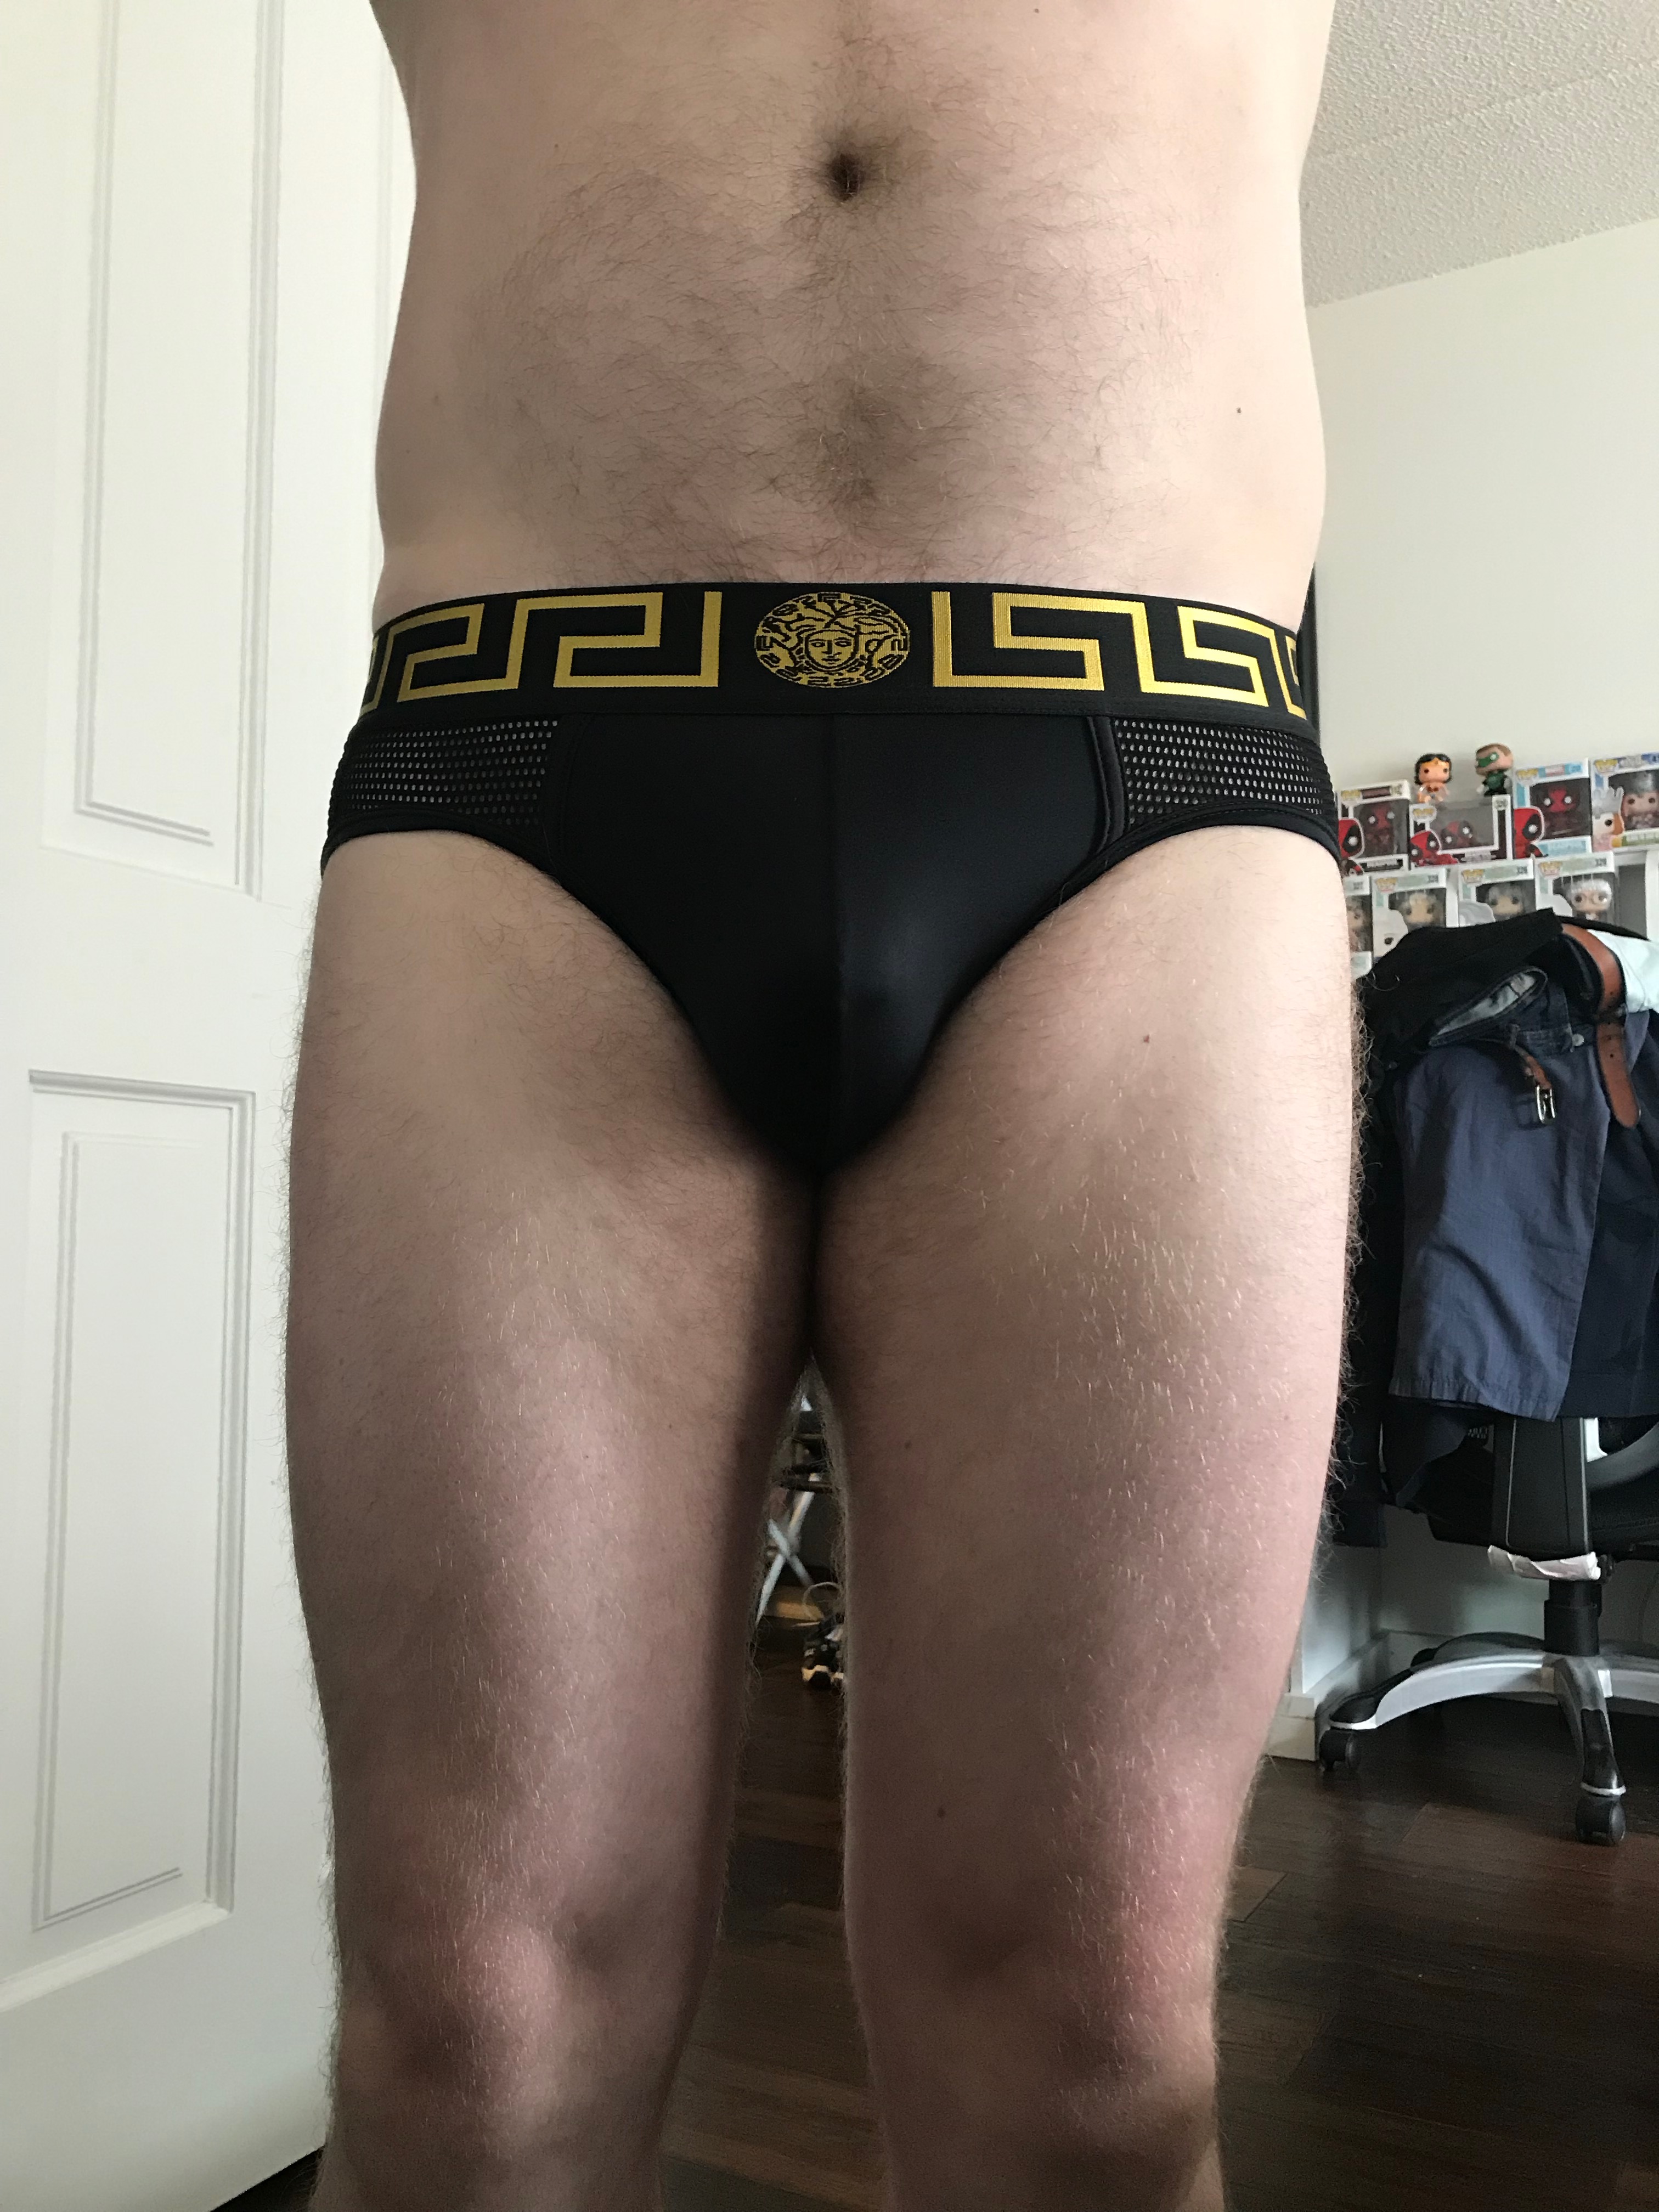 Versace black and mesh briefs to start the week…